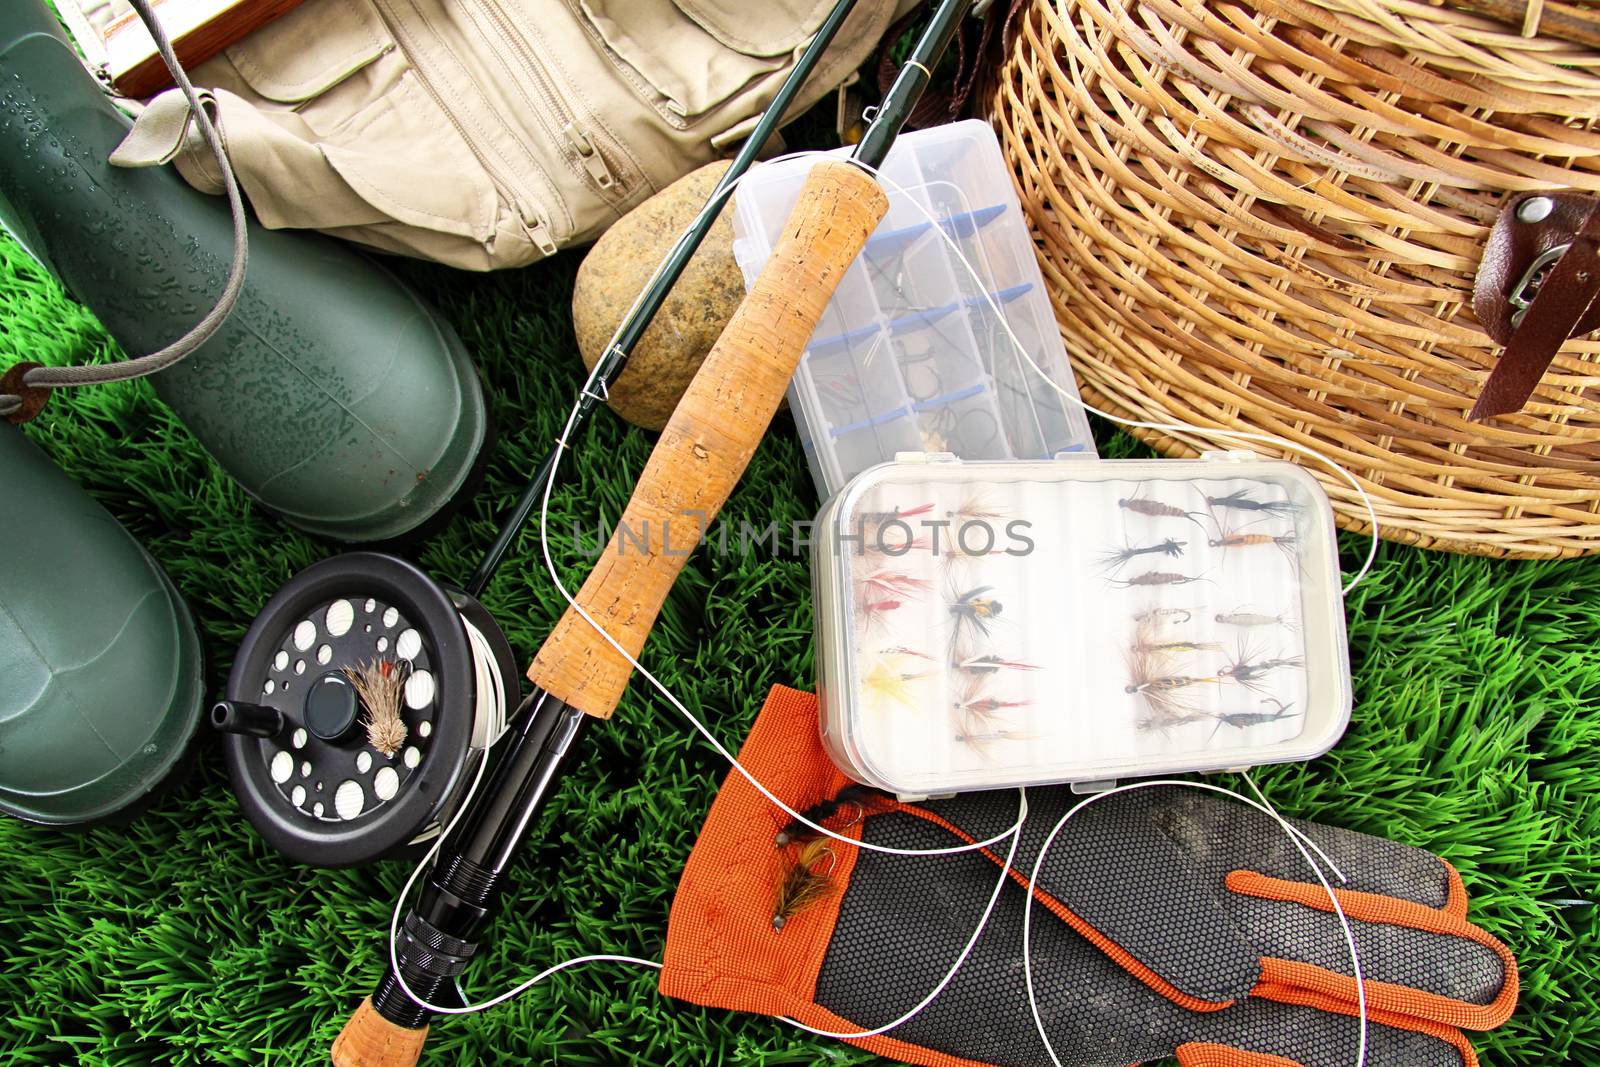 Fly fishing equipment and boots ready to use